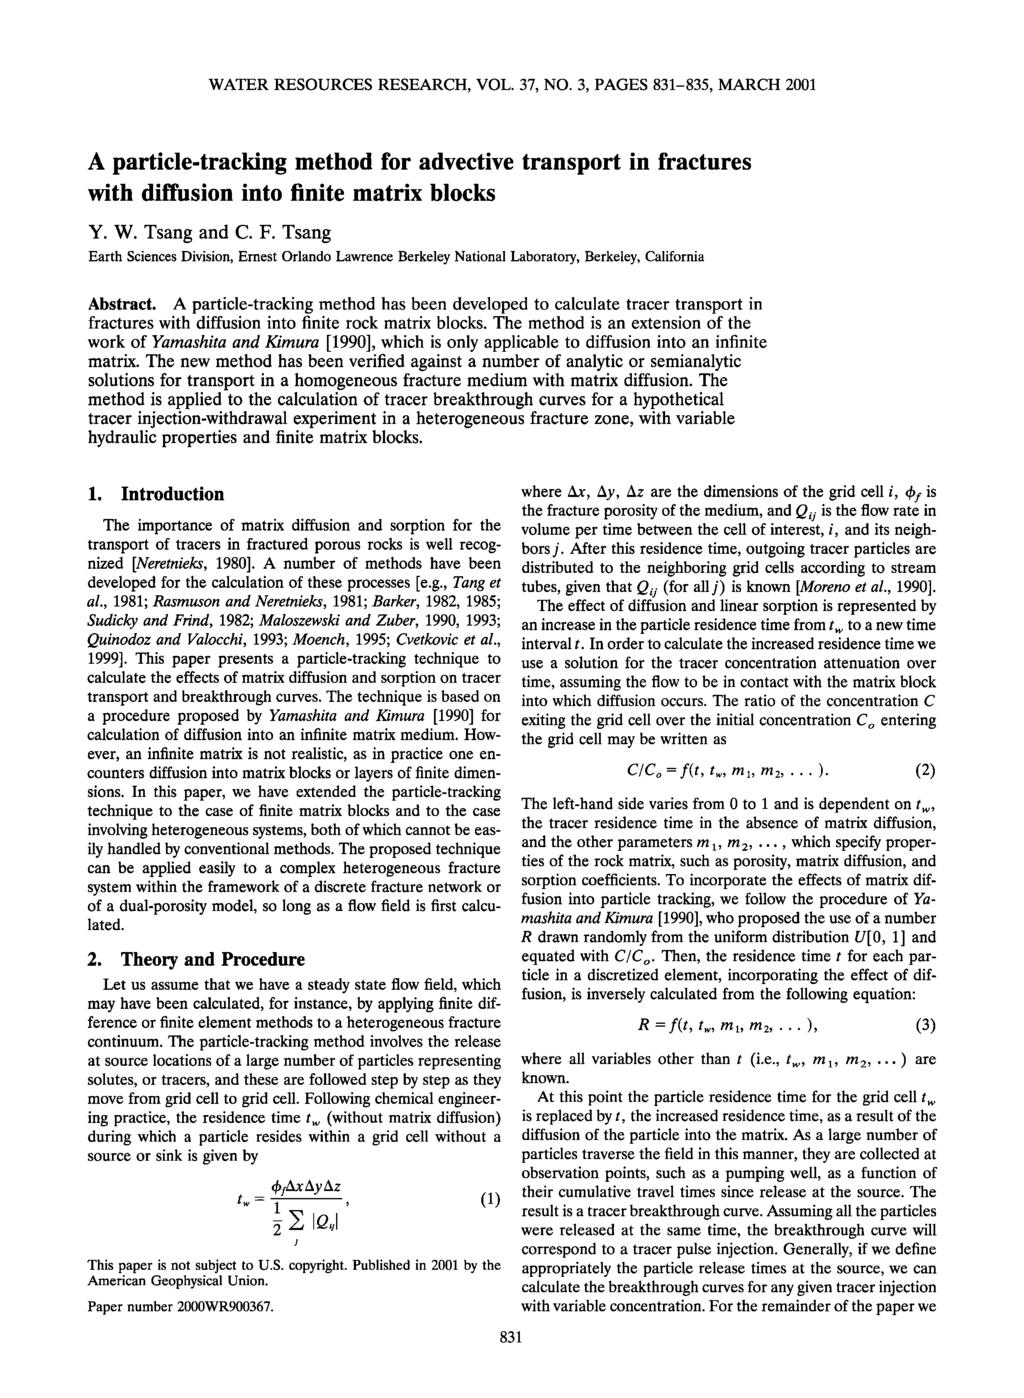 WATER RESOURCES RESEARCH, VOL. 37, NO. 3, PAGES 831-835, MARCH 2001 A particle-tracking method for advective transport in fractures with diffusion into finite matrix blocks Y. W. Tsang and C. F.